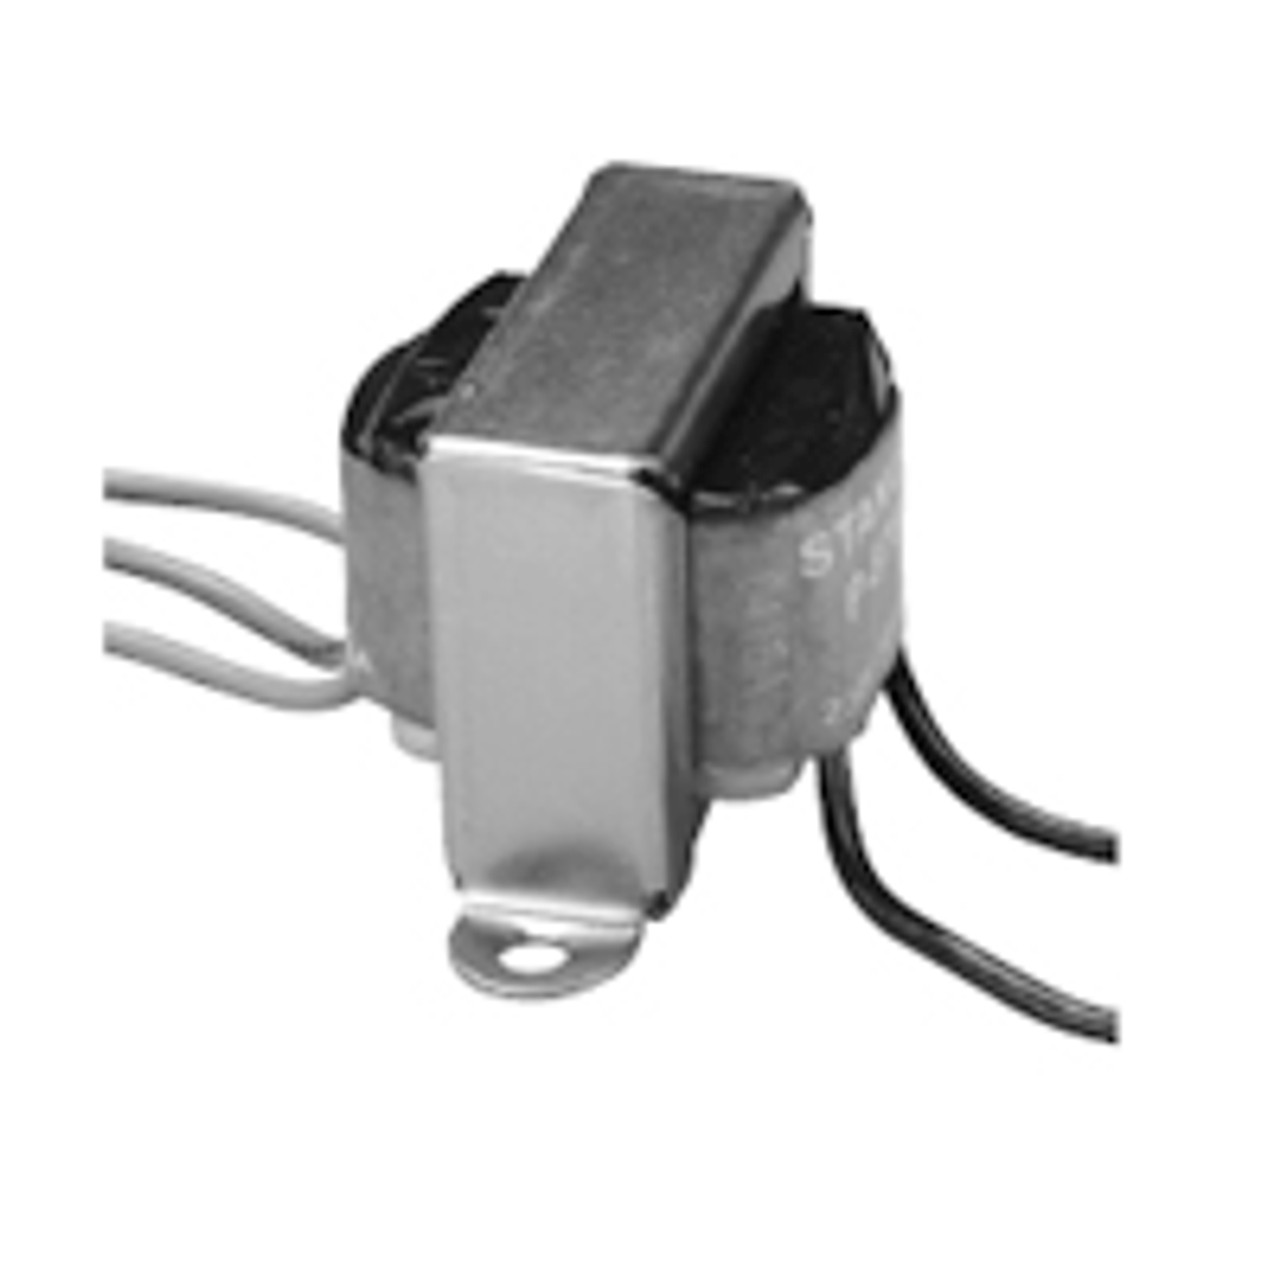 Stancor / White Rodgers P-8613 Power Transformers